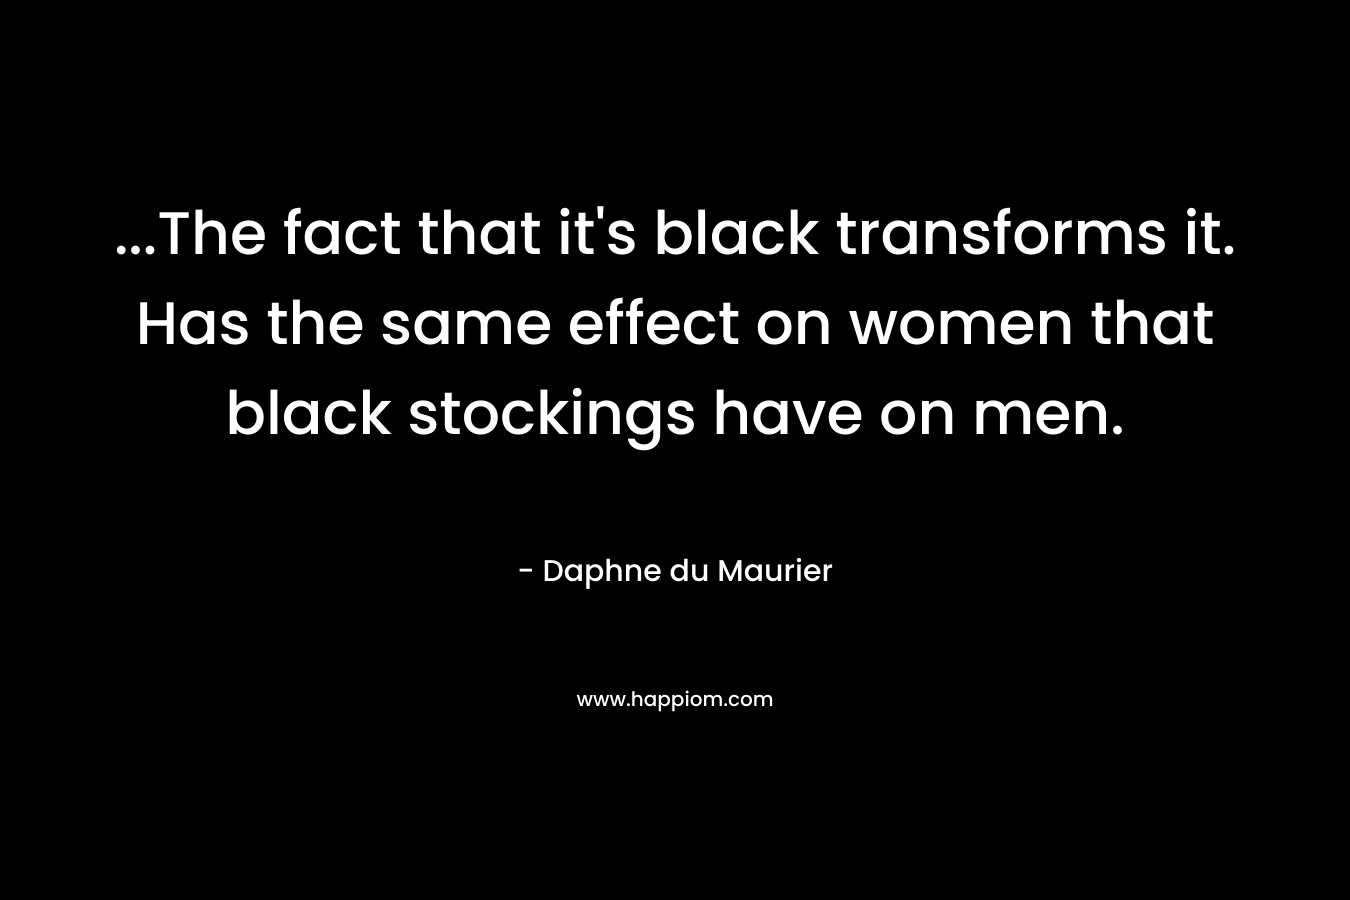 …The fact that it’s black transforms it. Has the same effect on women that black stockings have on men. – Daphne du Maurier